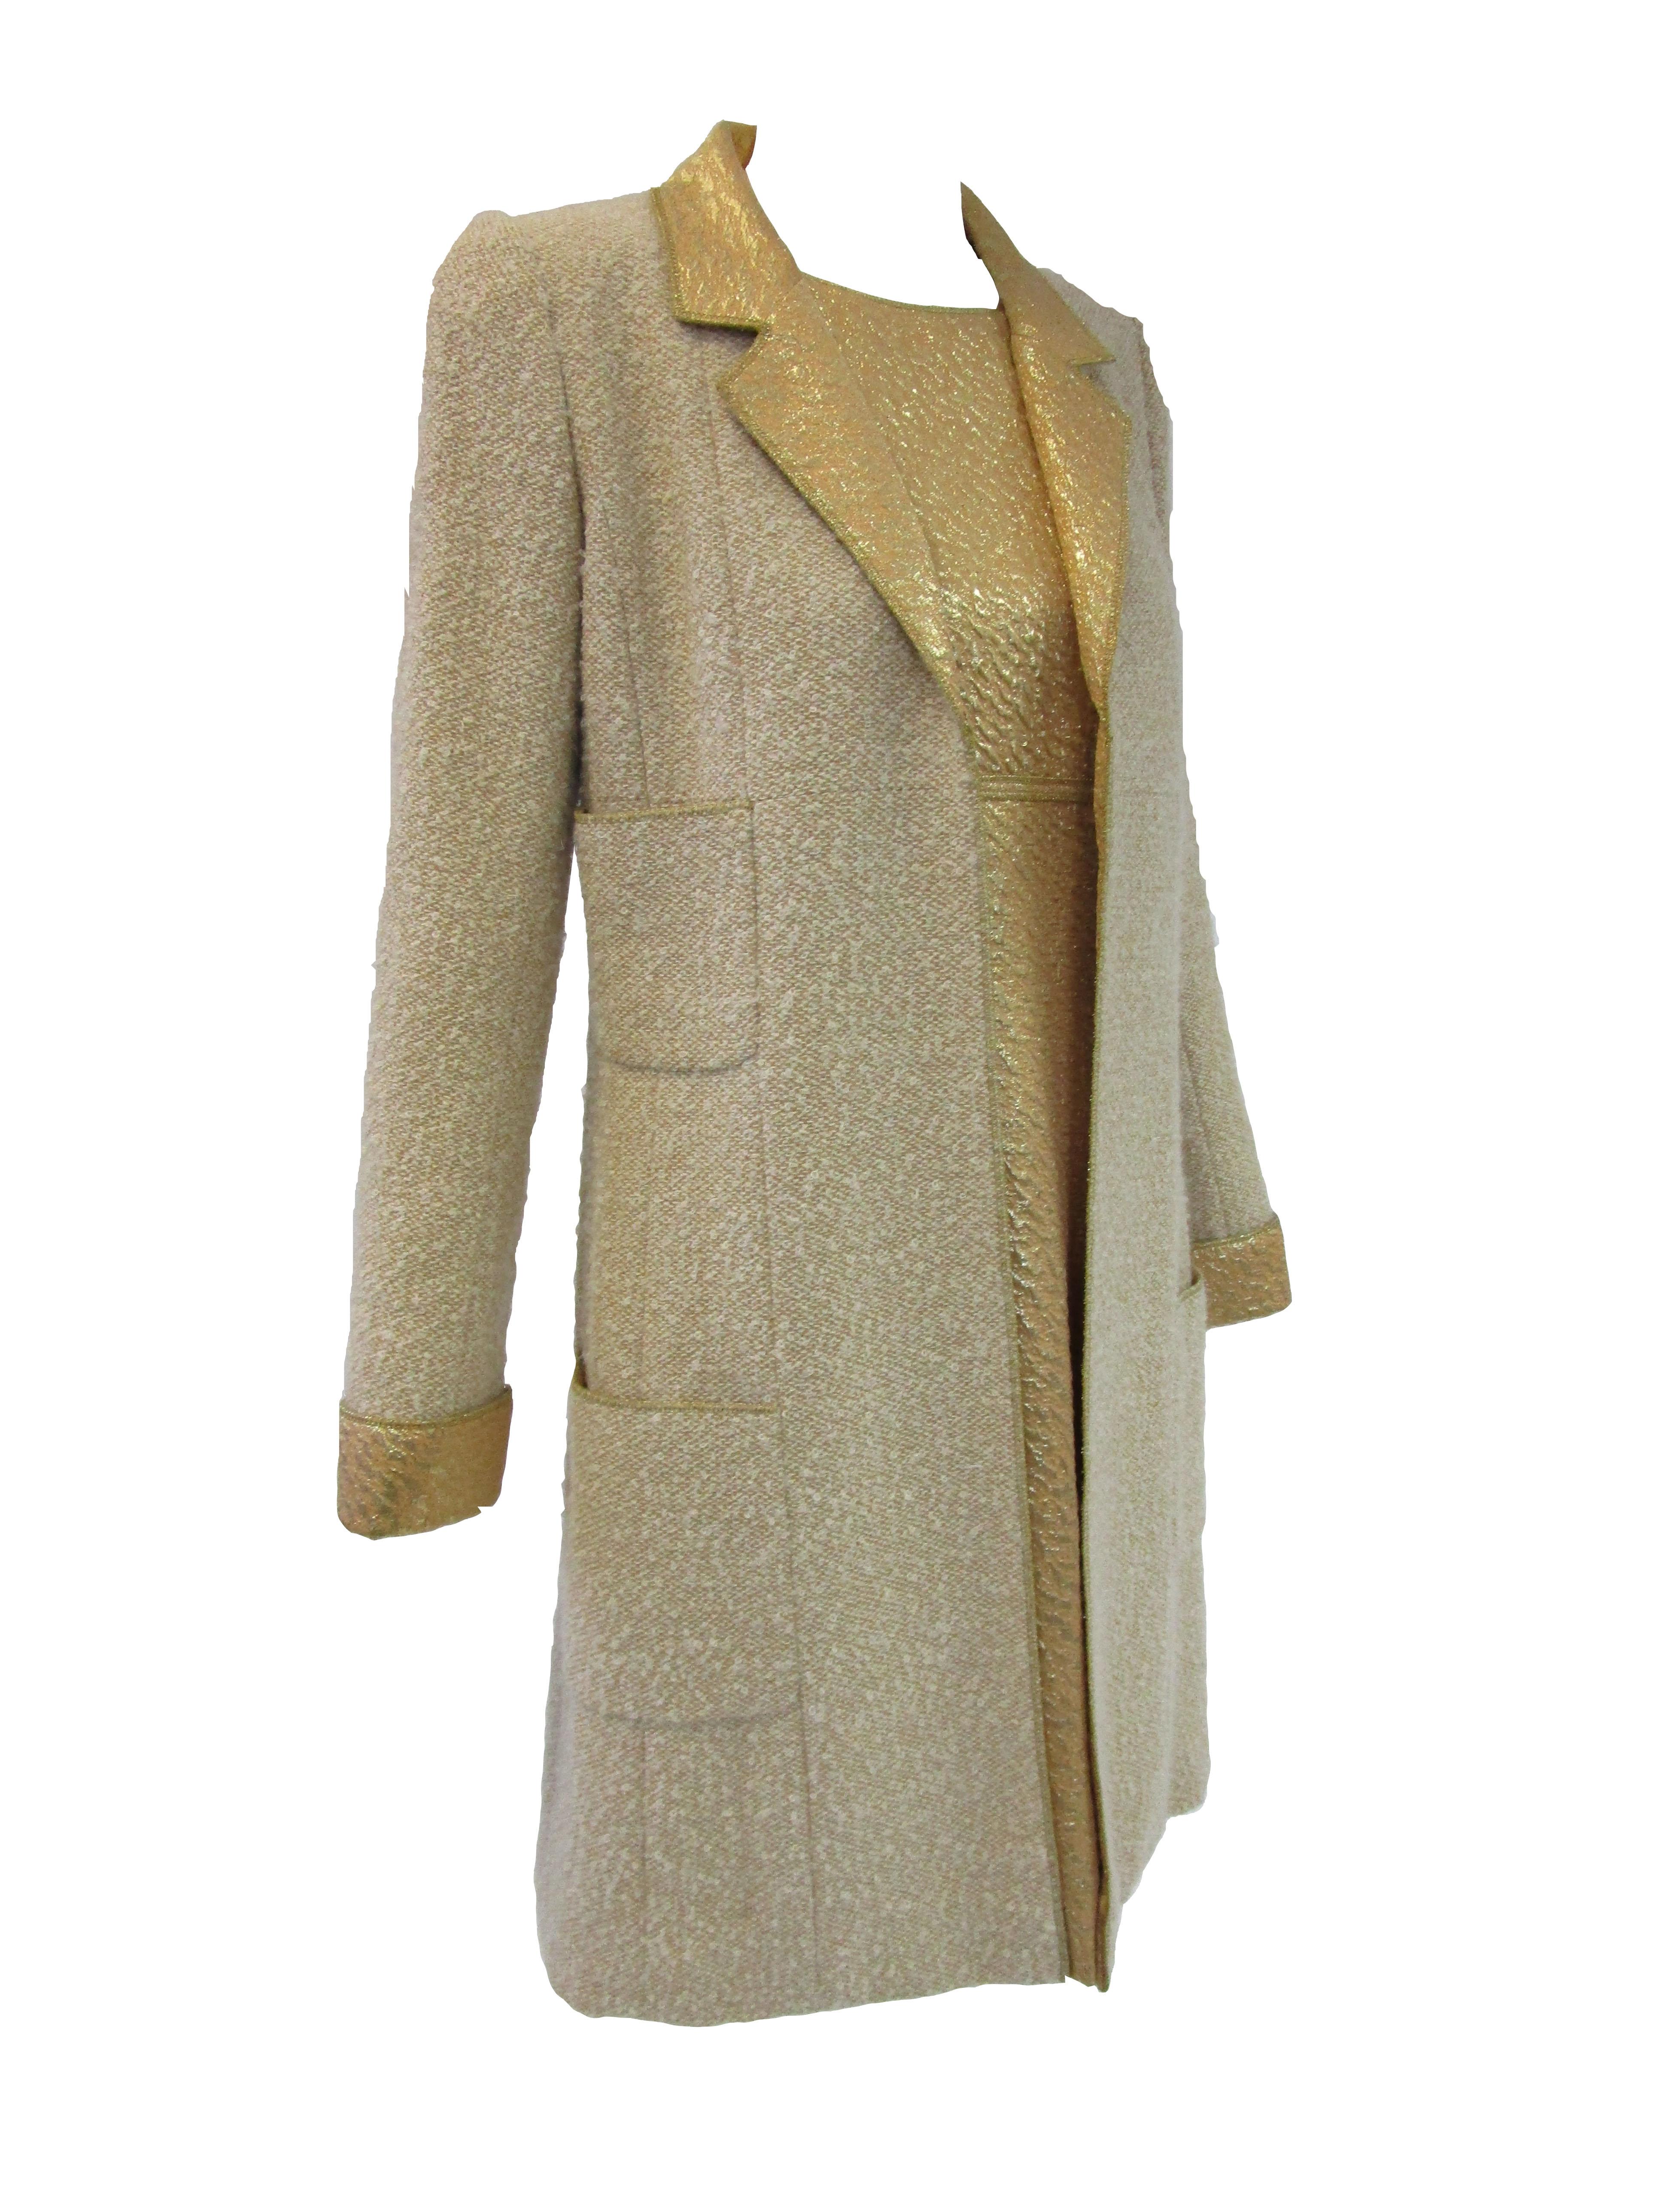 1996 Chanel by Lagerfeld Golden Boucle and Lame Shift Dress and Coat For Sale 4